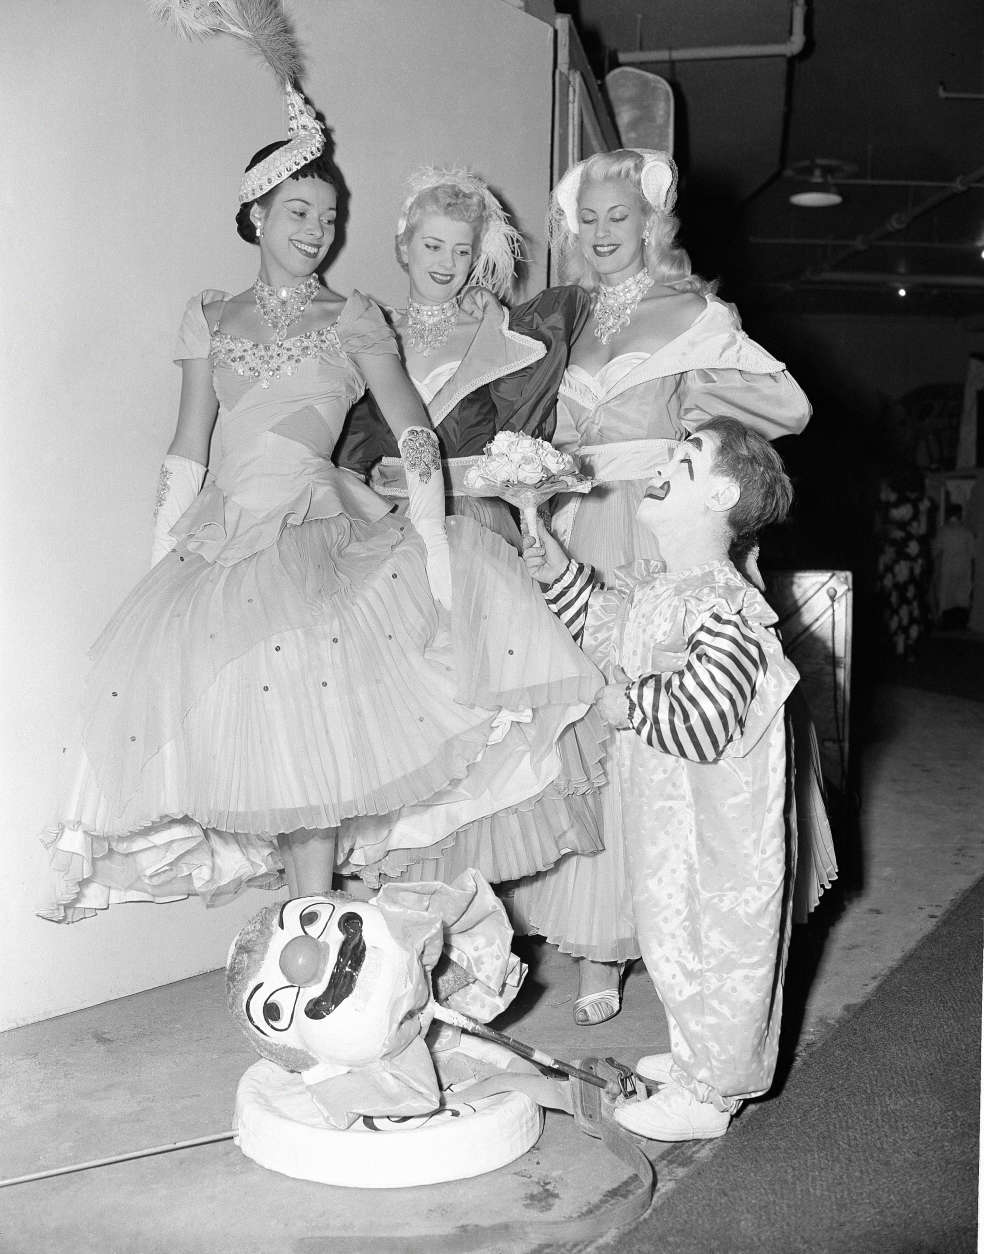 With a princely gesture, circus midget Prince Paul presents flowers to three English girls who are in the show, backstage during the New York run, April 14, 1953. The girls are: left to right, Pat Cooper, who is from Devonshire; Shiley Coomas and Brinda Elliot, both of London. (AP Photo/VN)